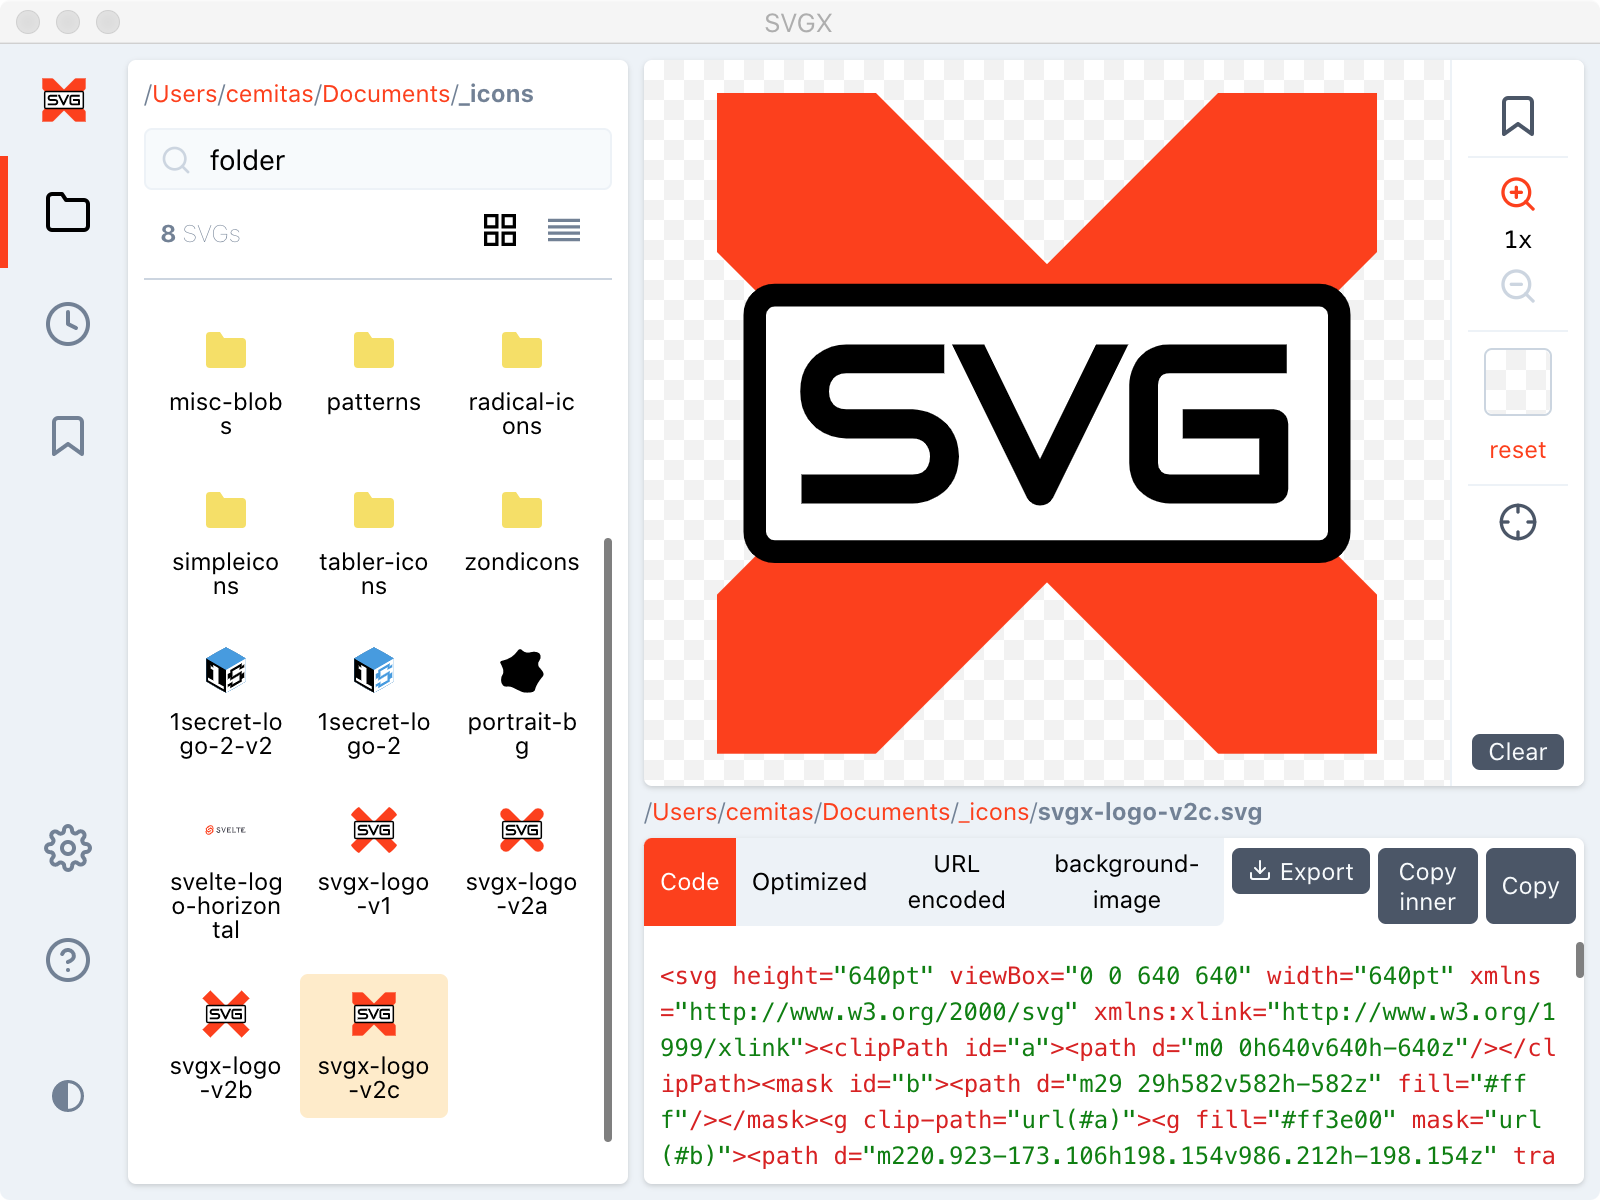 SVGX Launched on Product Hunt